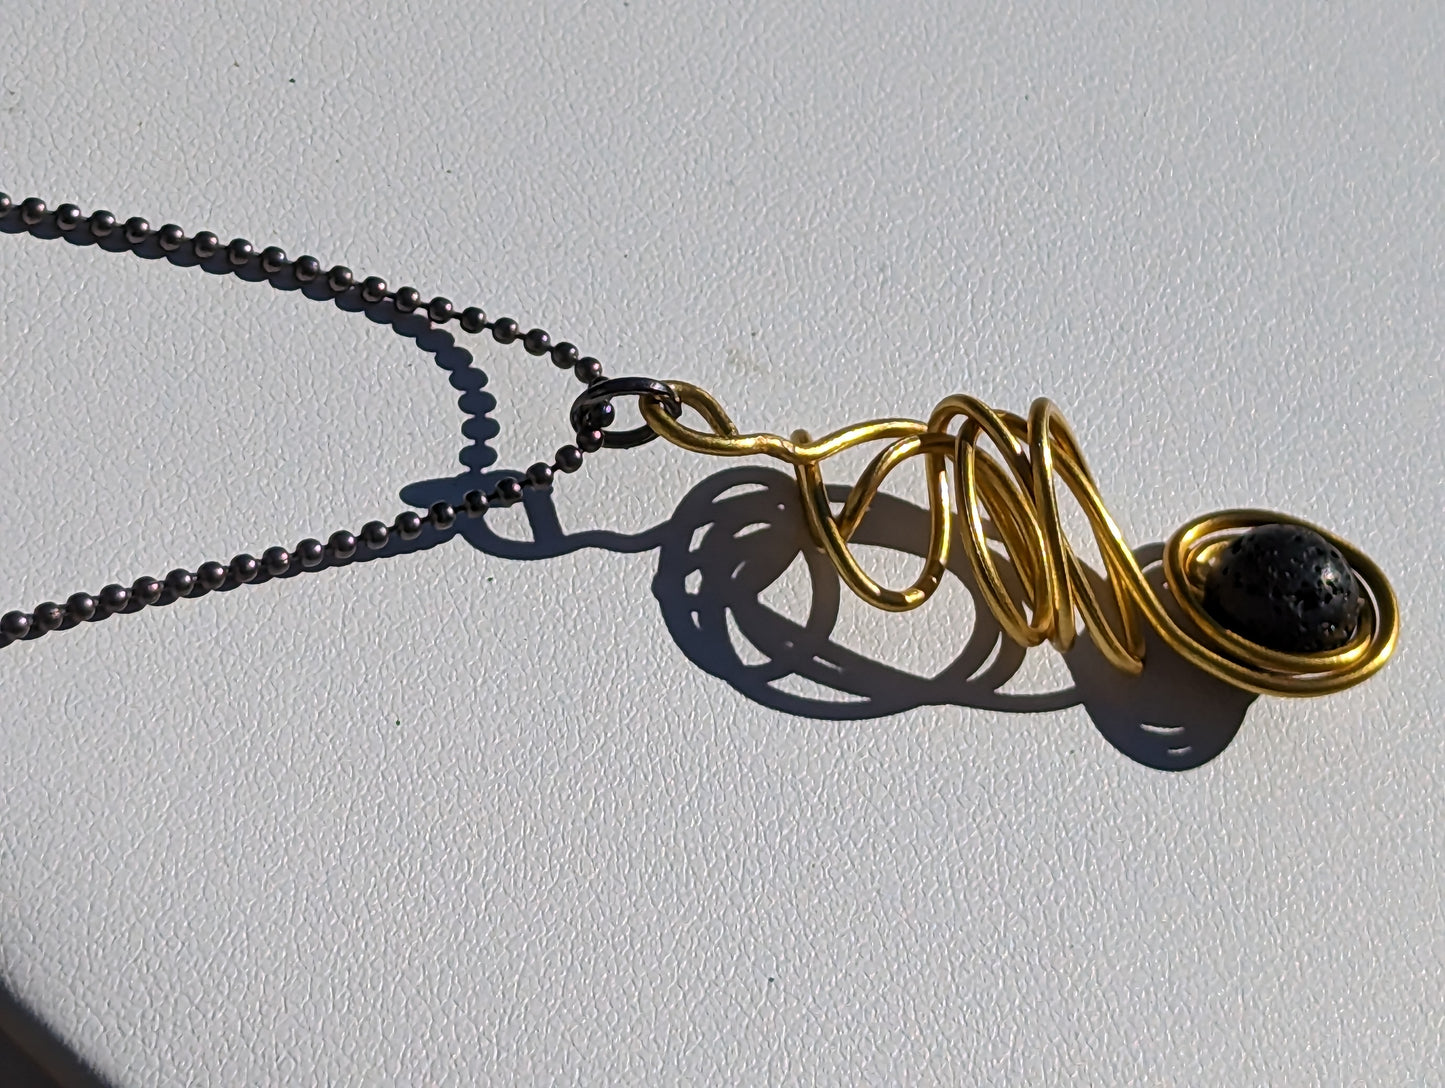 Wire Wrapped Lava Bead Hanger (or Keychain) - Gold with Spiral